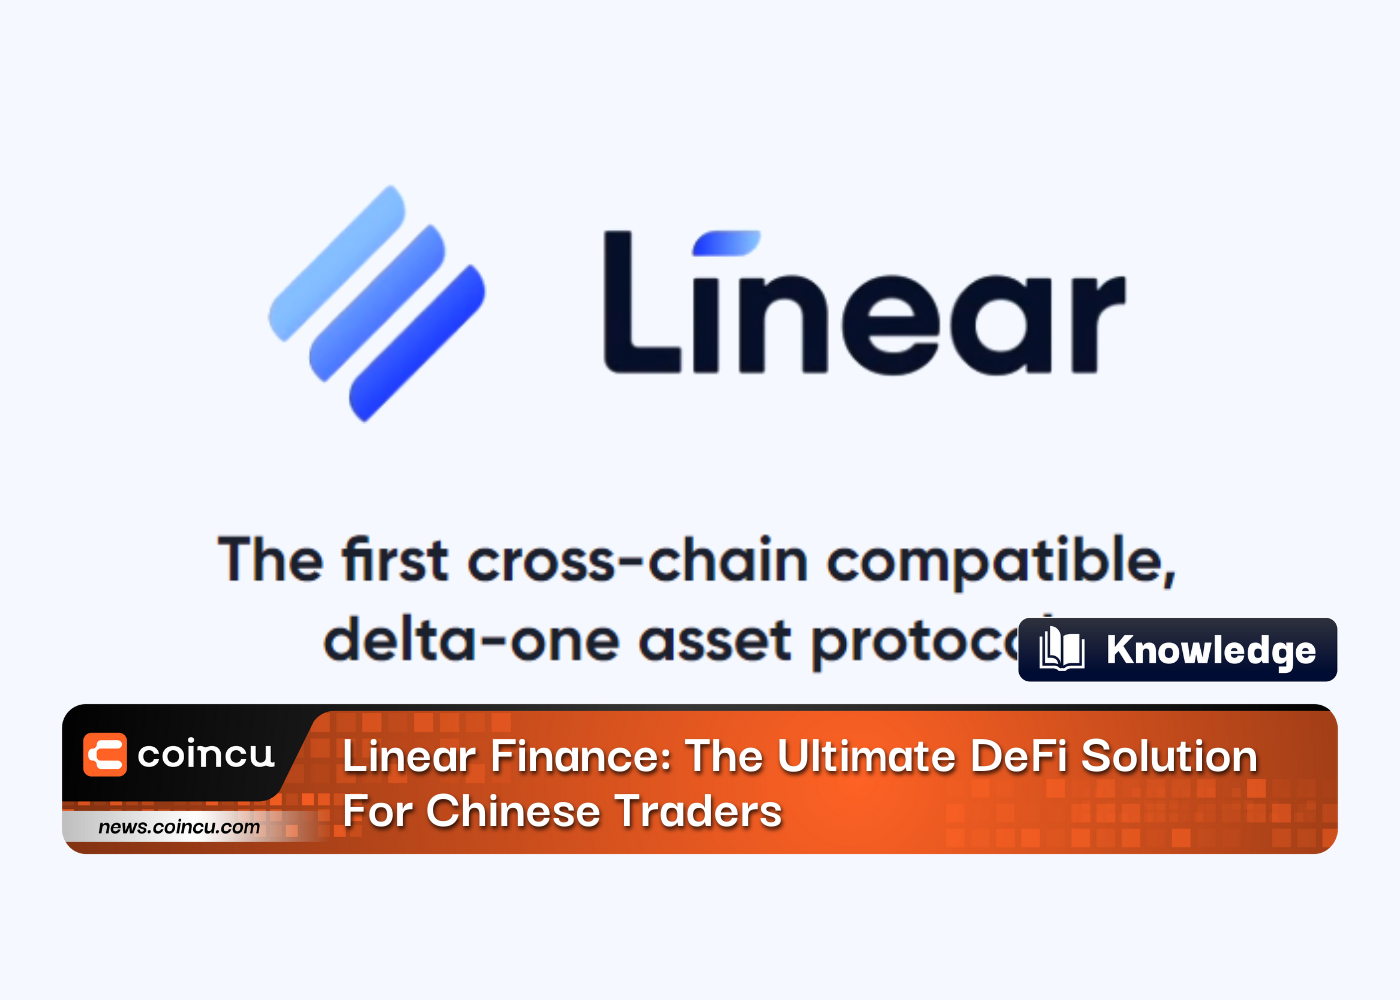 Linear Finance: The Ultimate DeFi Solution For Chinese Traders